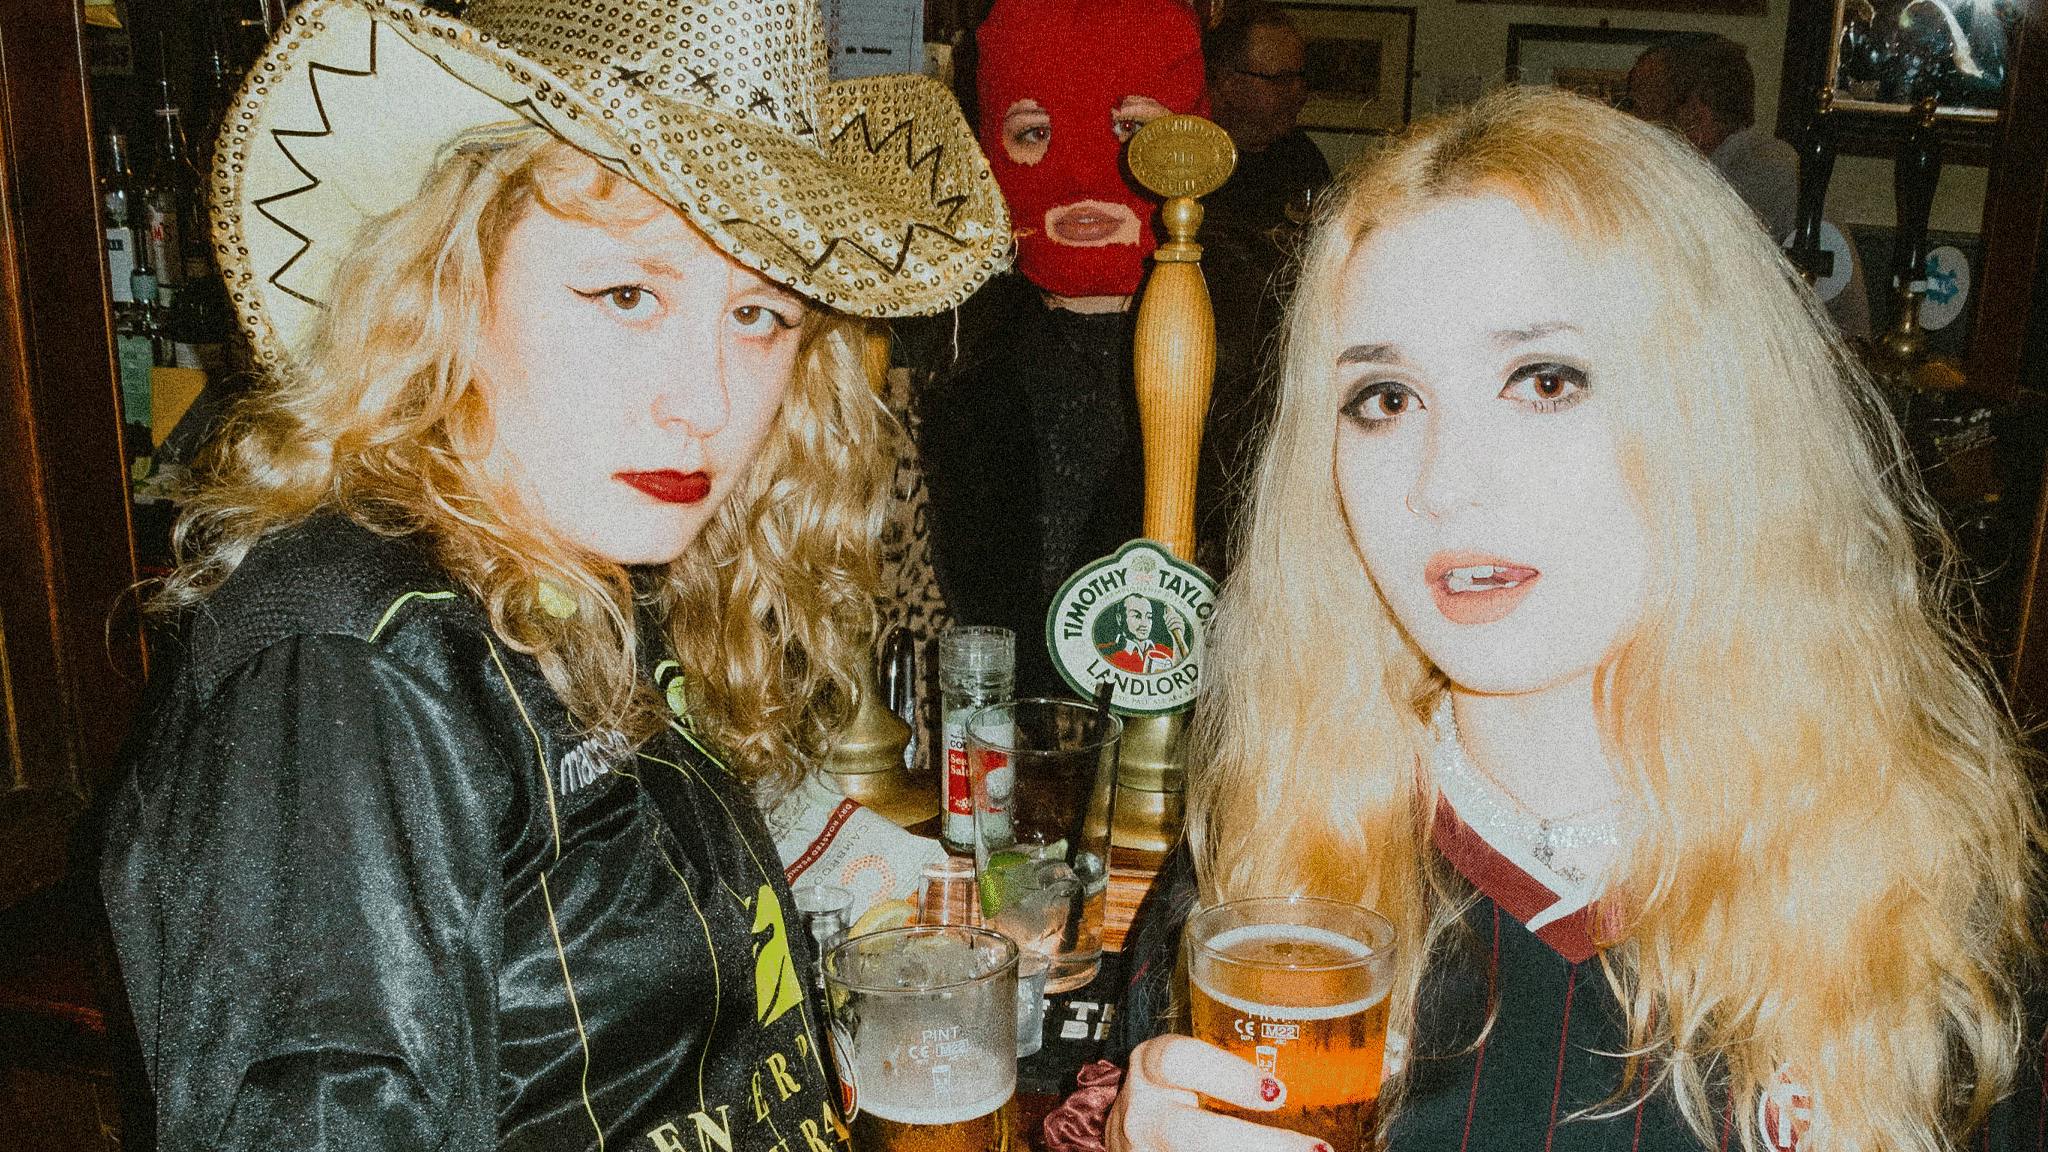 Listen to Lambrini Girls’ fired-up new single, Lads Lads Lads